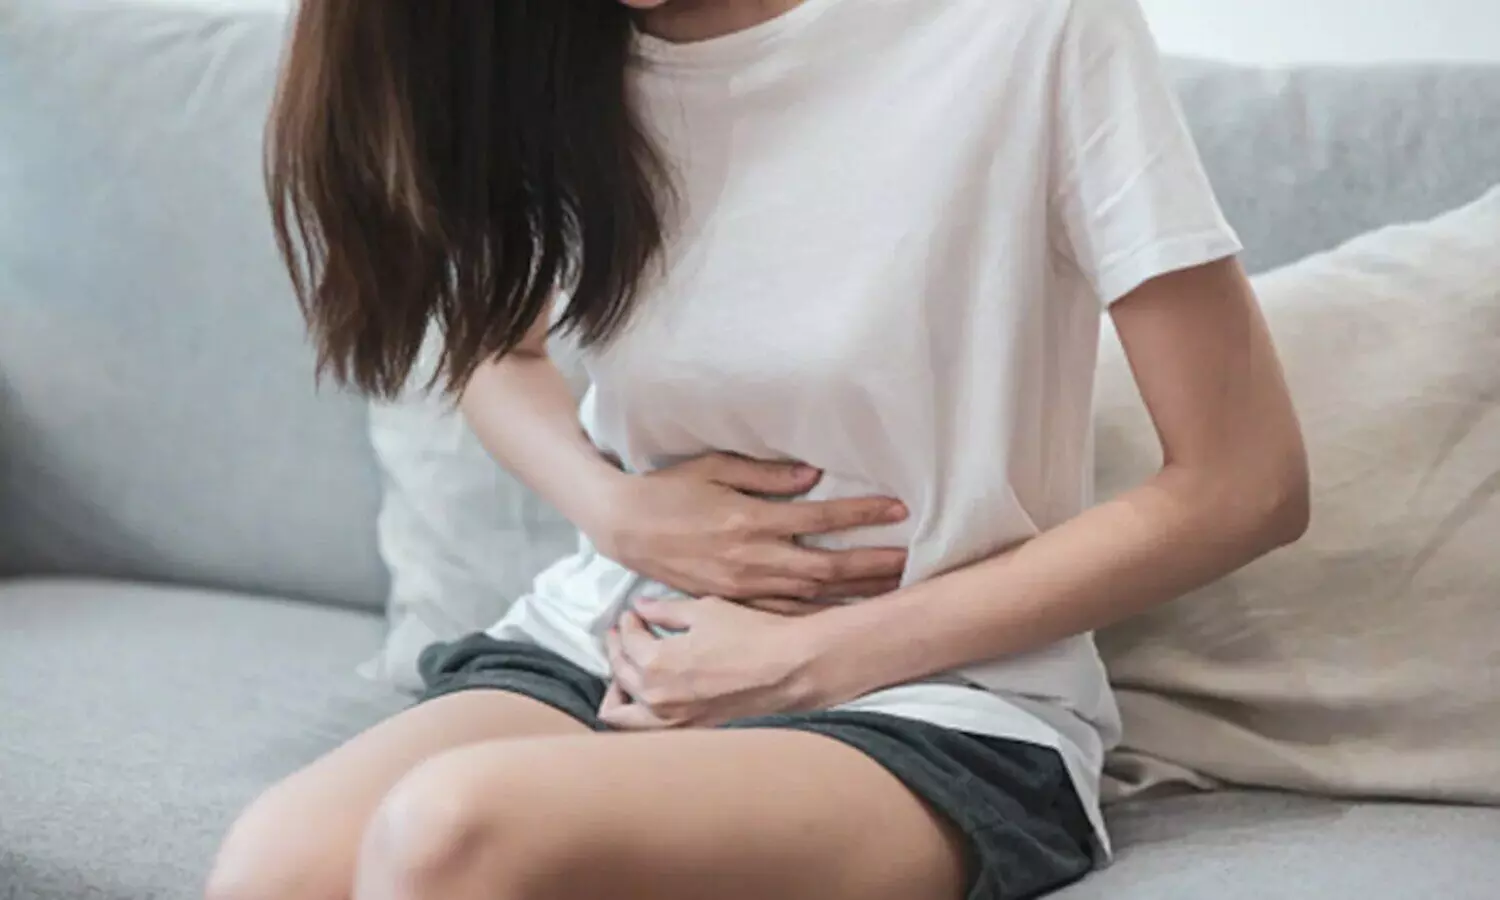 Home Remedies For Period Pain